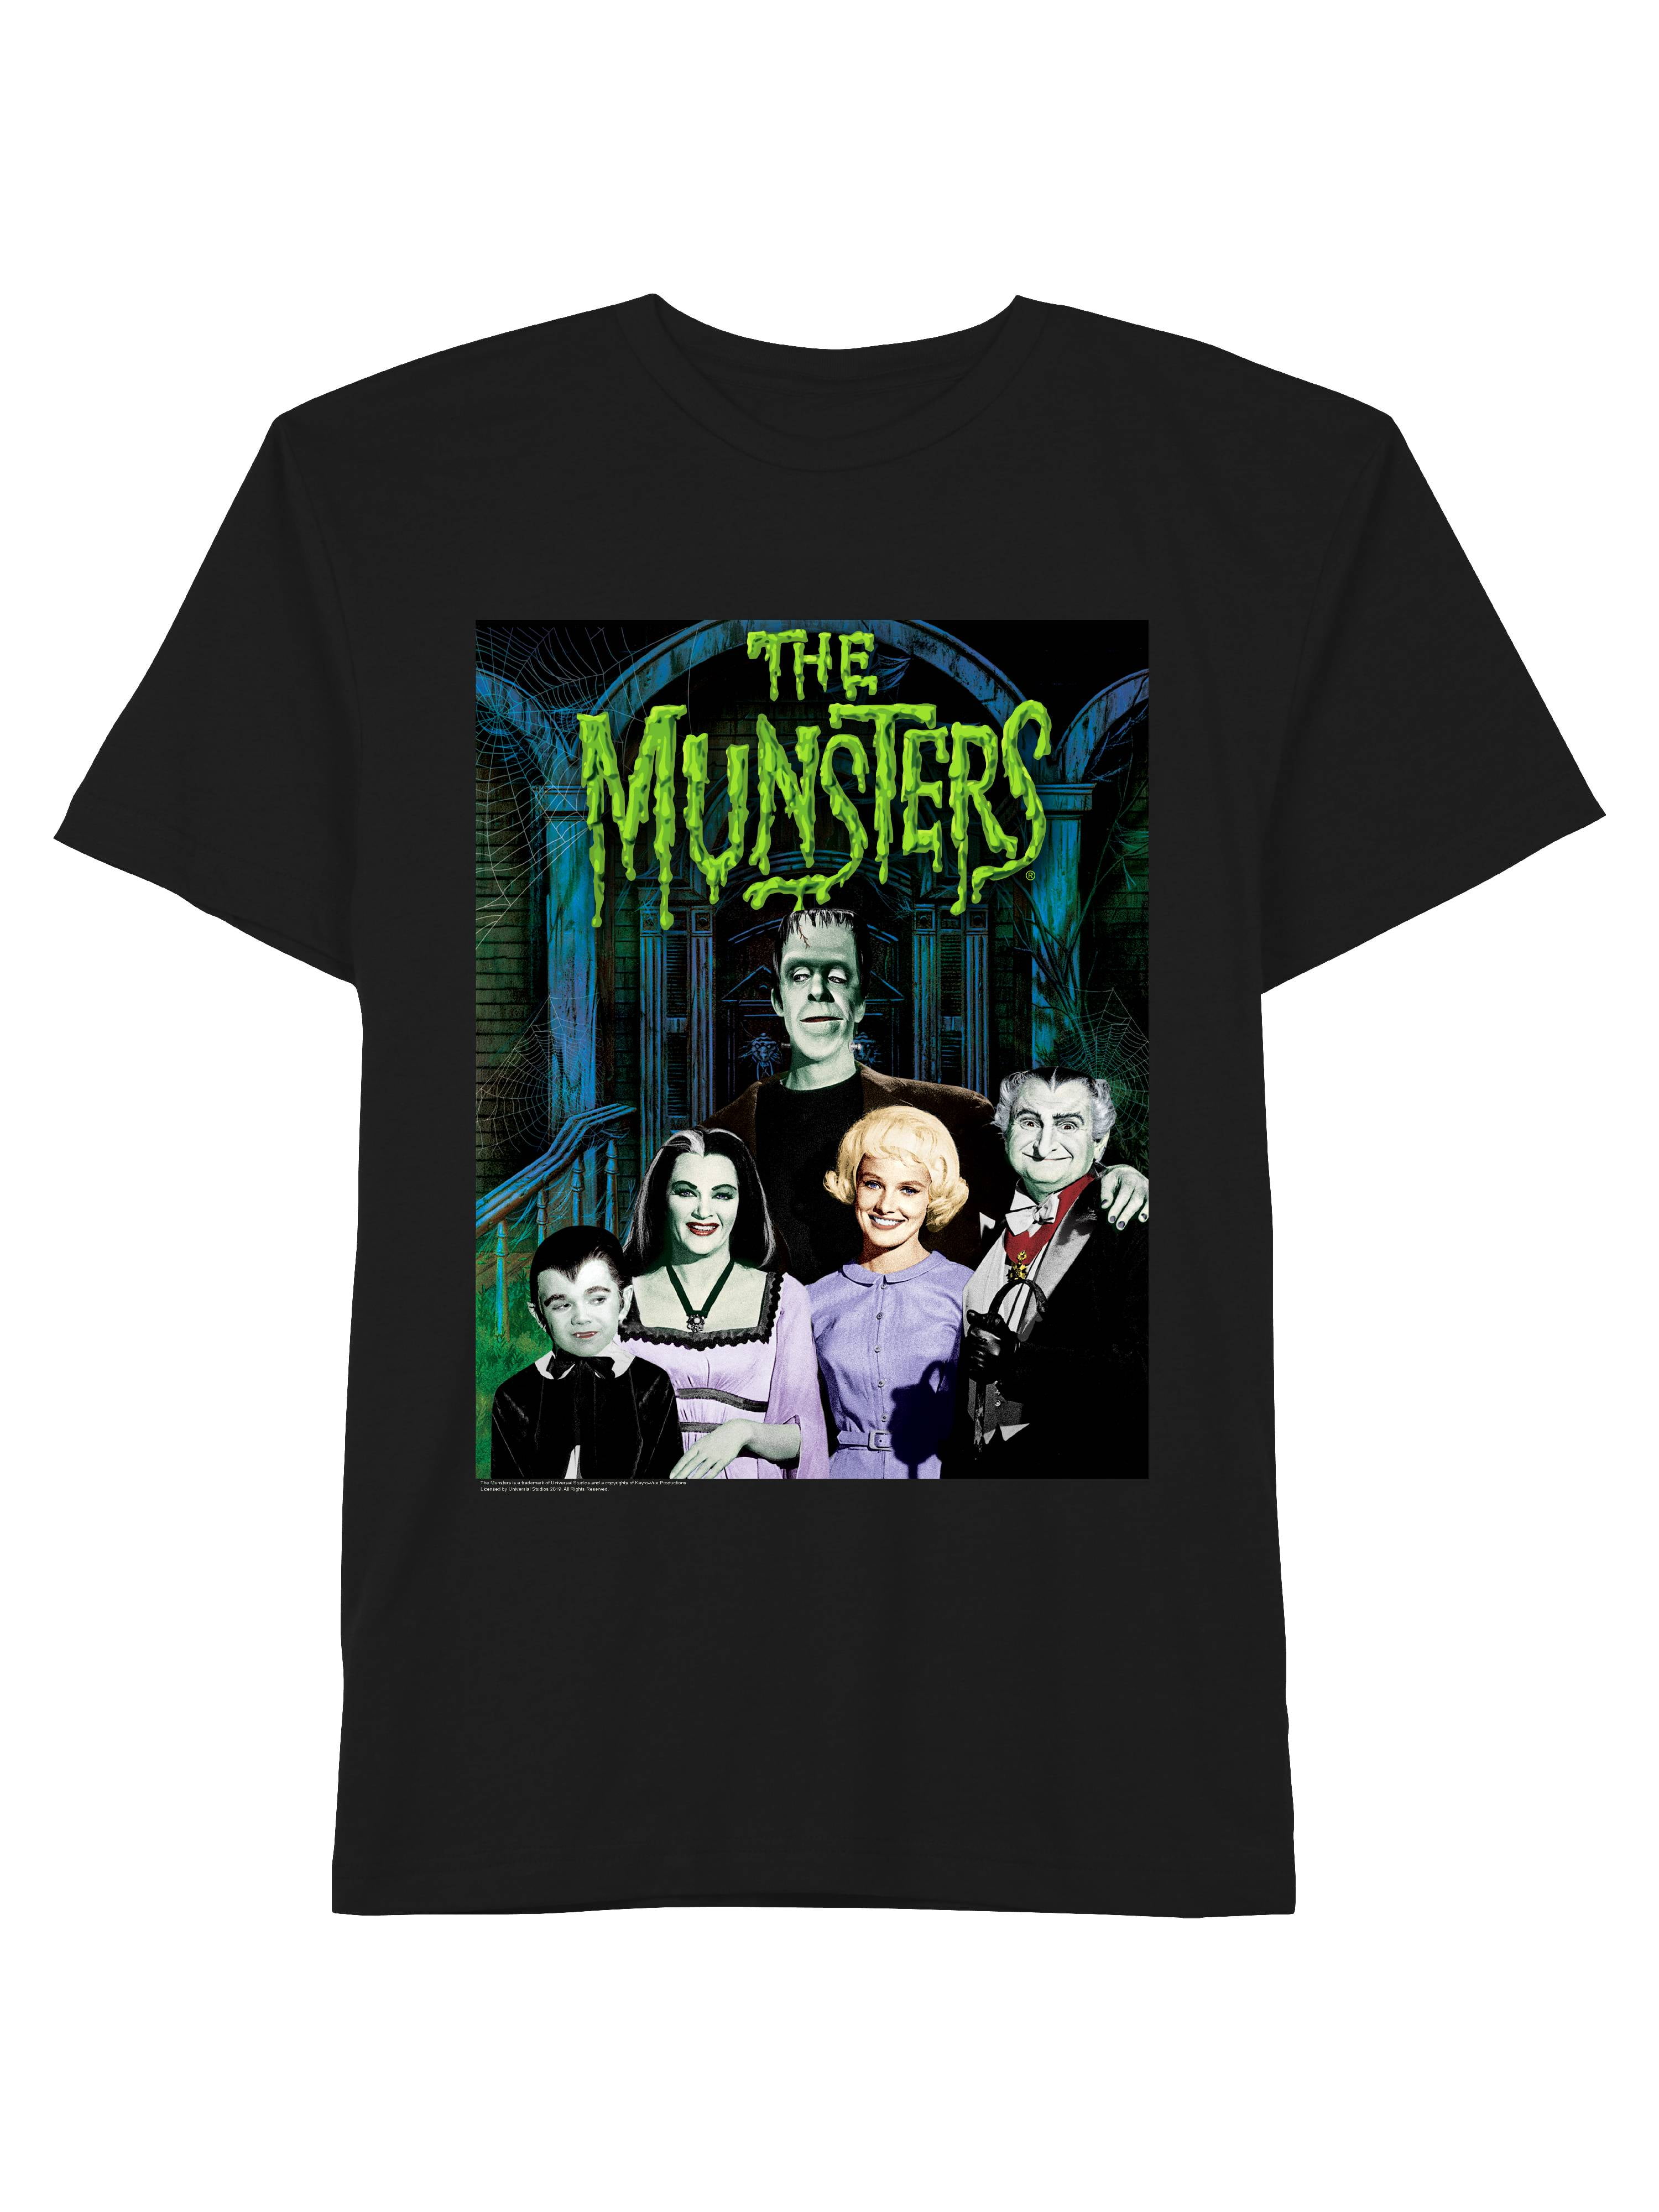 The Munsters Plus Size Womens T-Shirt Stylish Big and Tall Tops